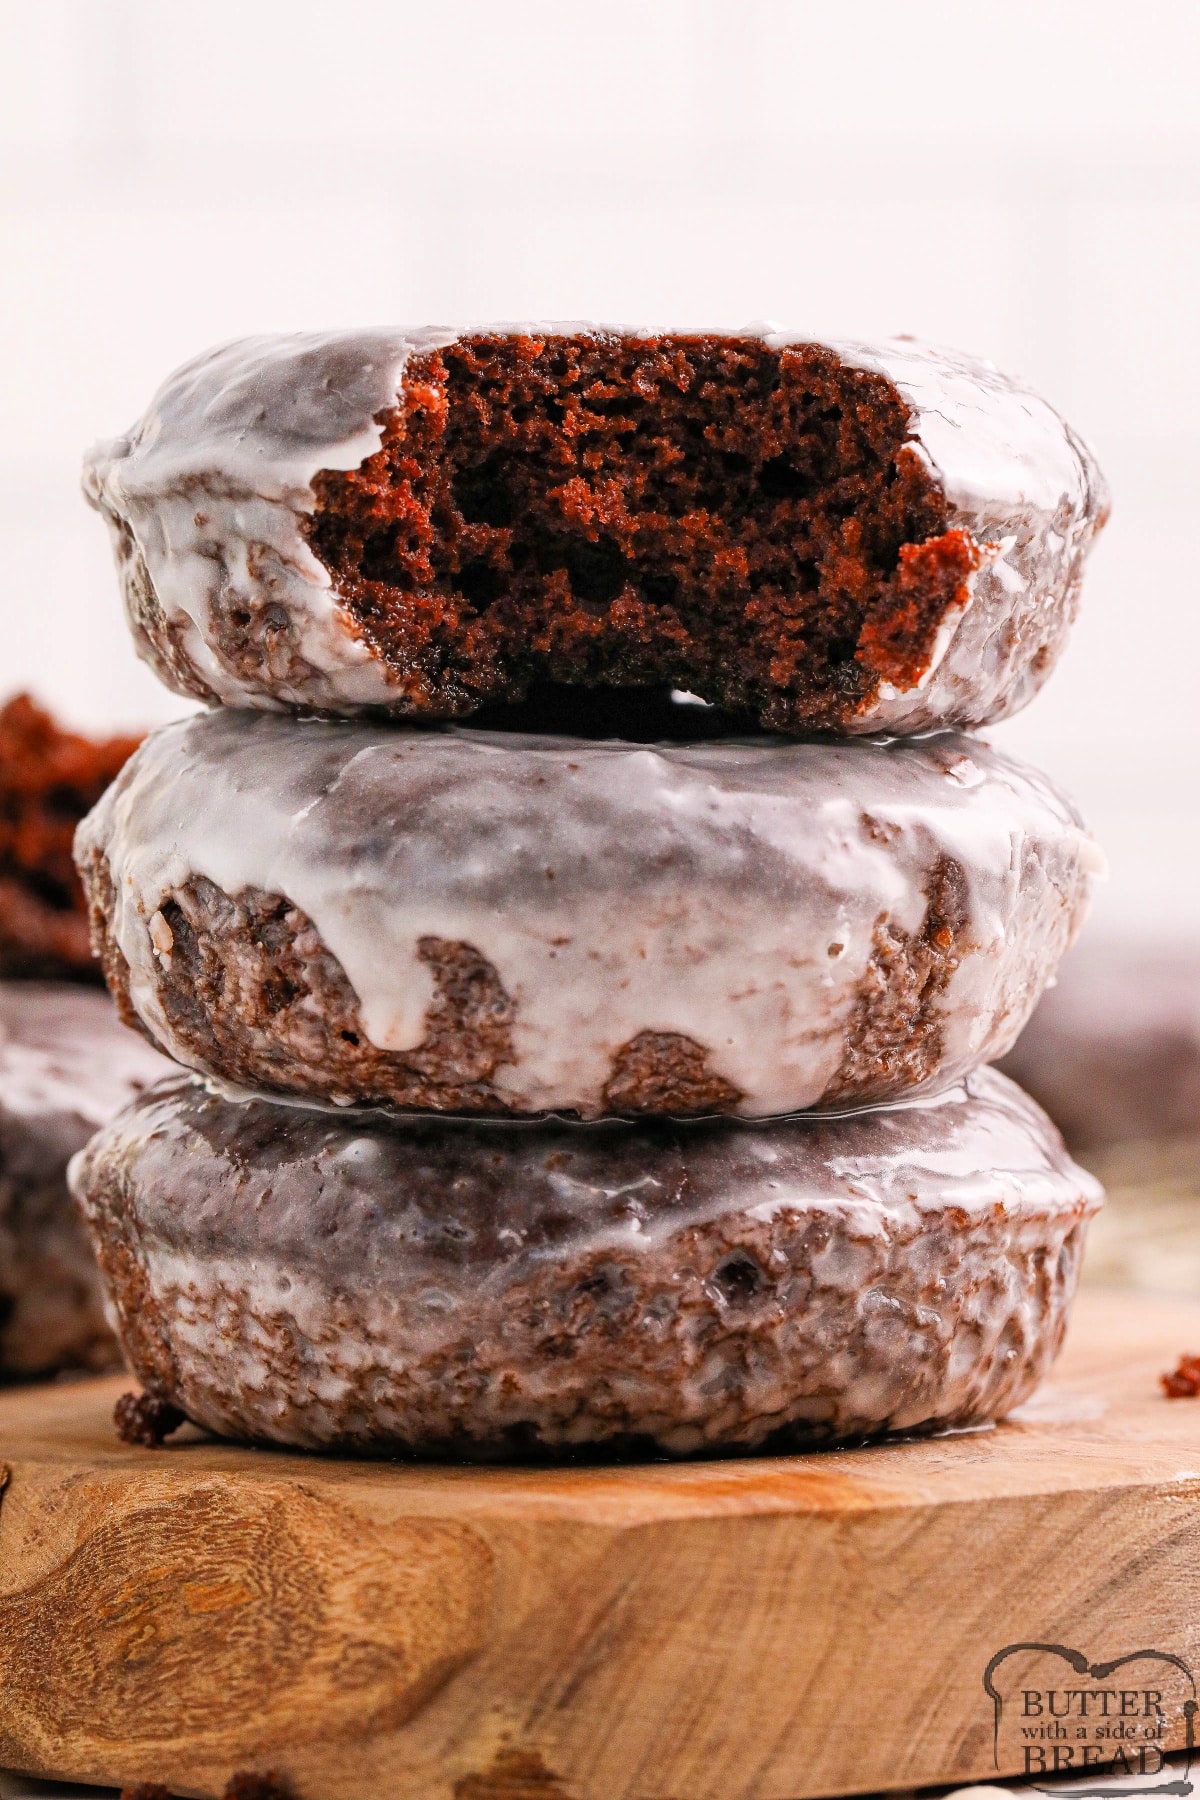 Baked chocolate donuts. 